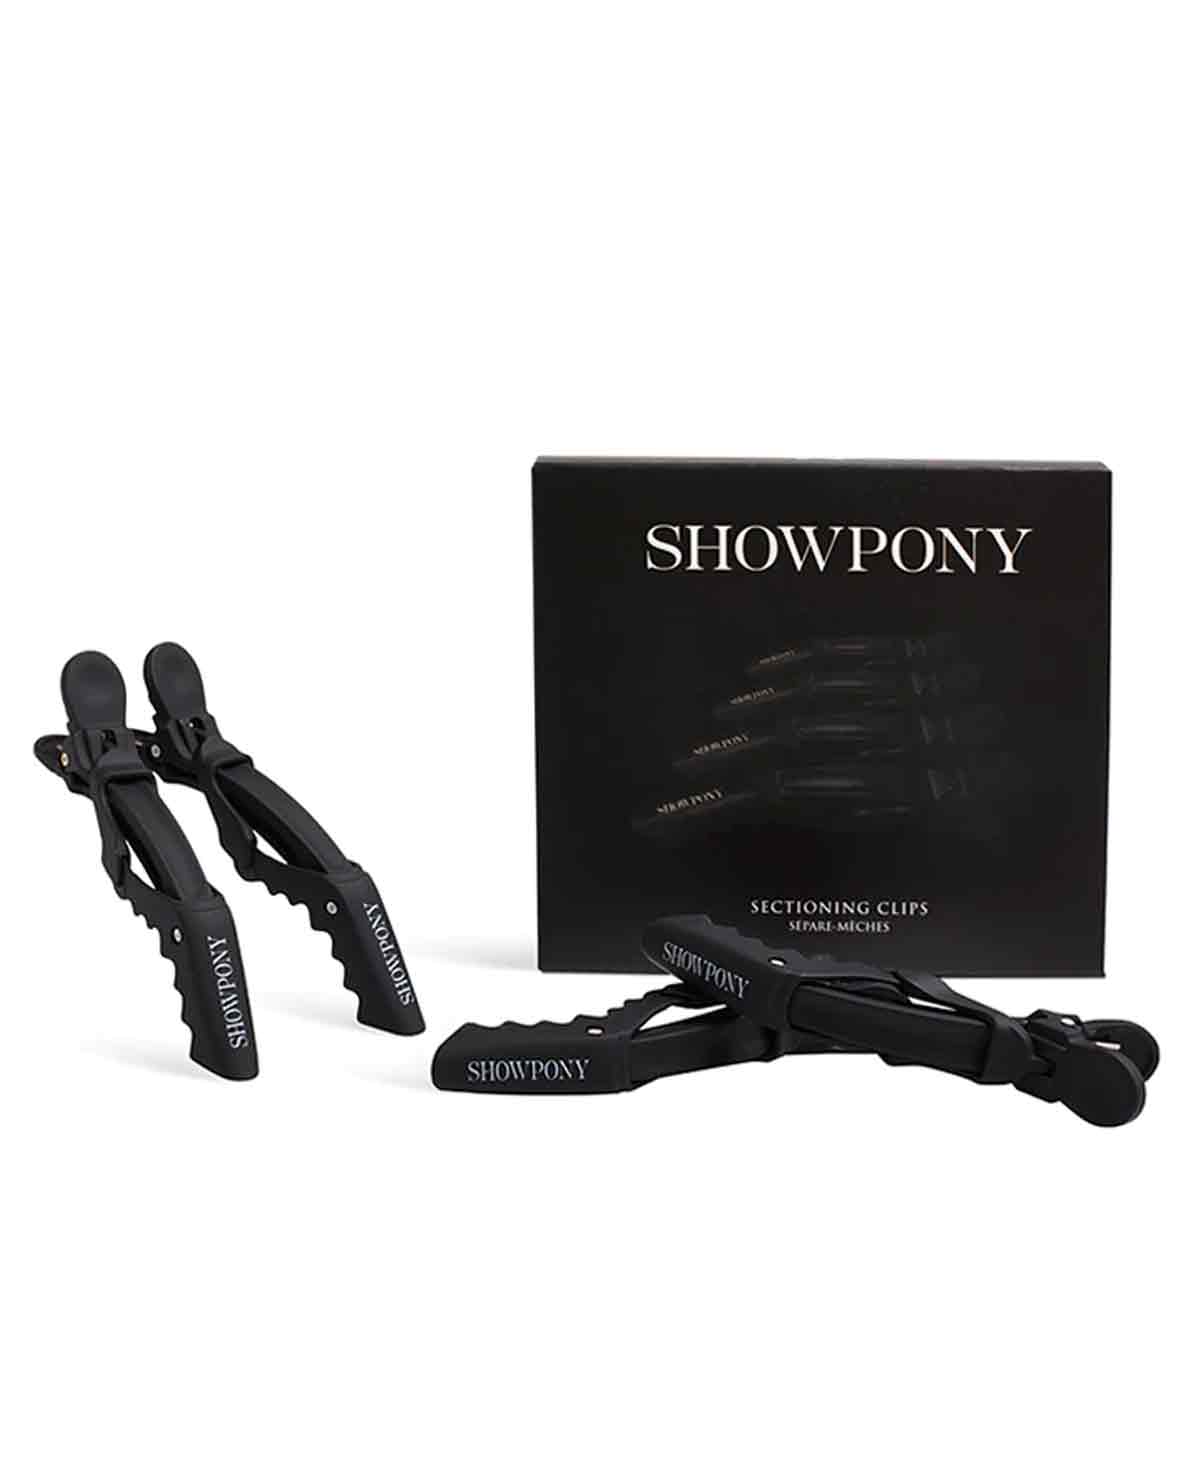 Showpony Sectioning Clips - 4 per Pack - Black